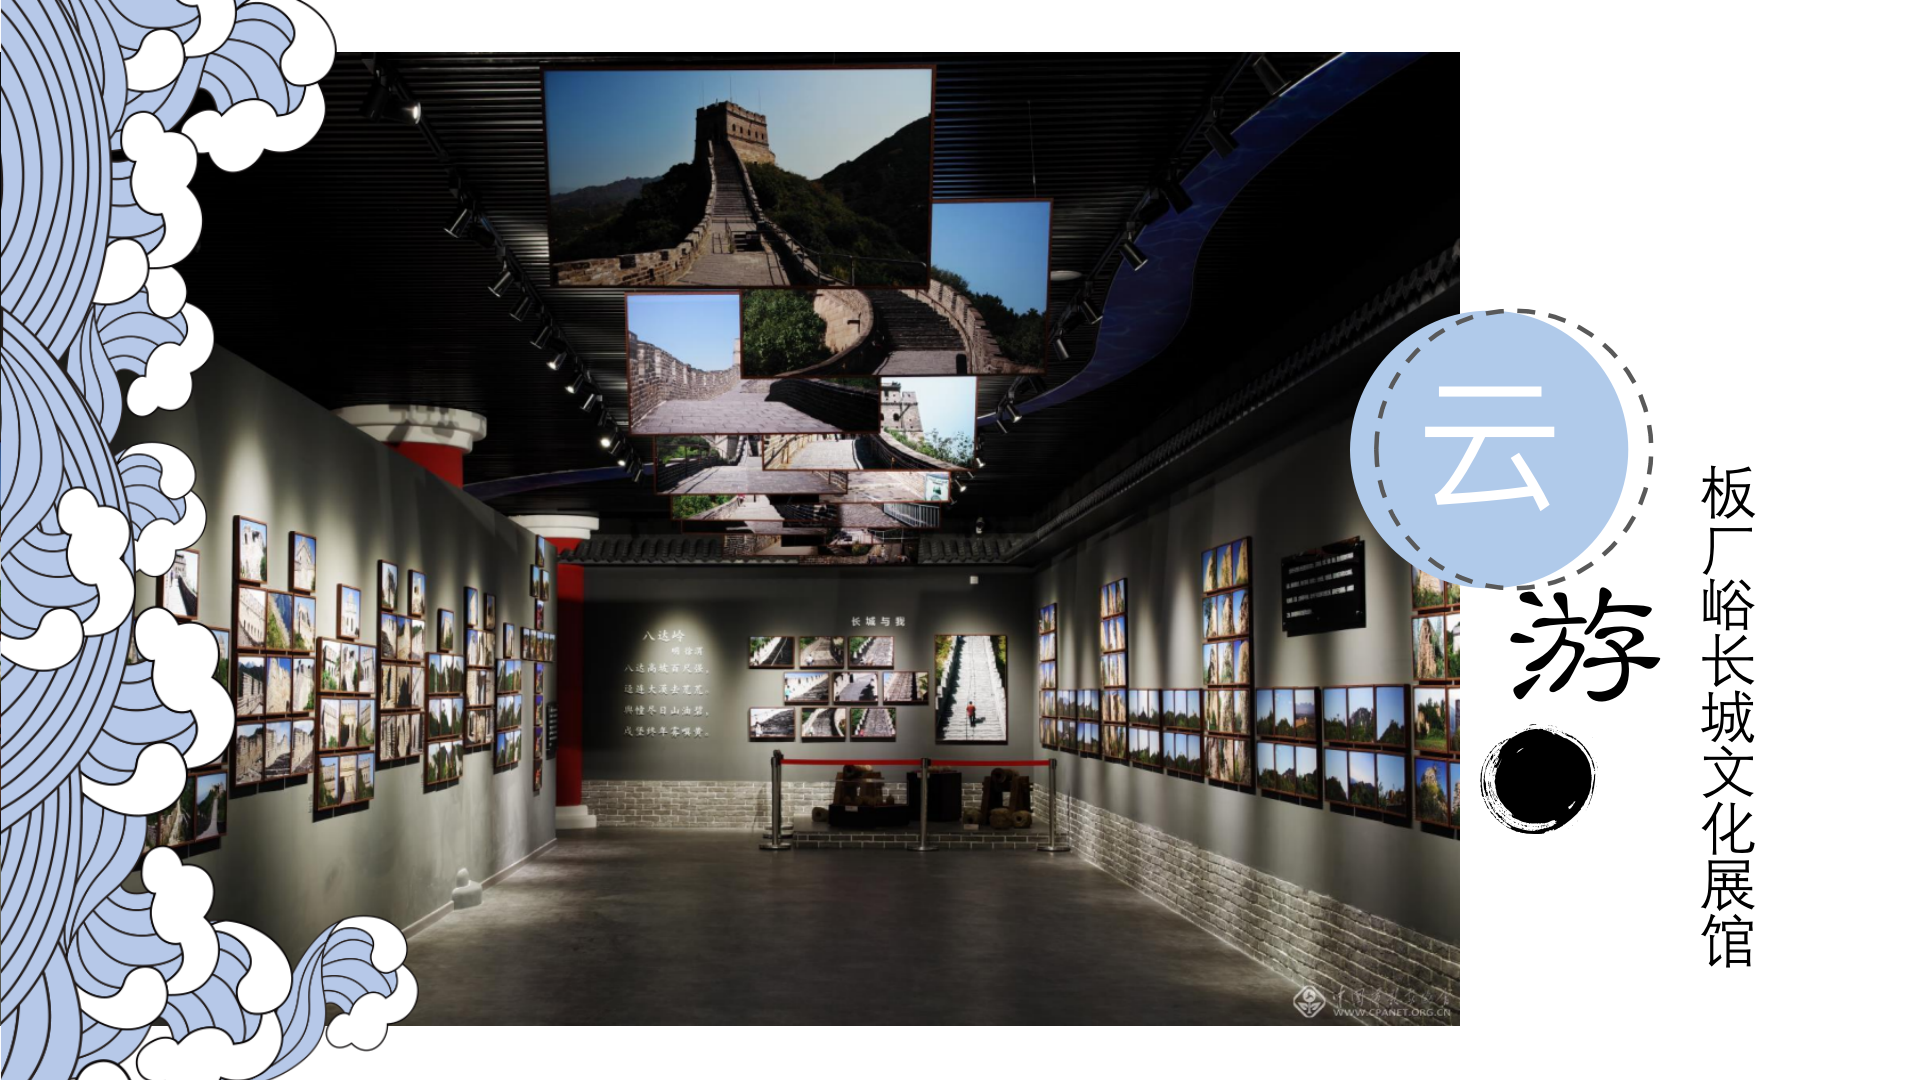 visit the Great Wall Cultural Exhibition Hall under Banchangyu Village